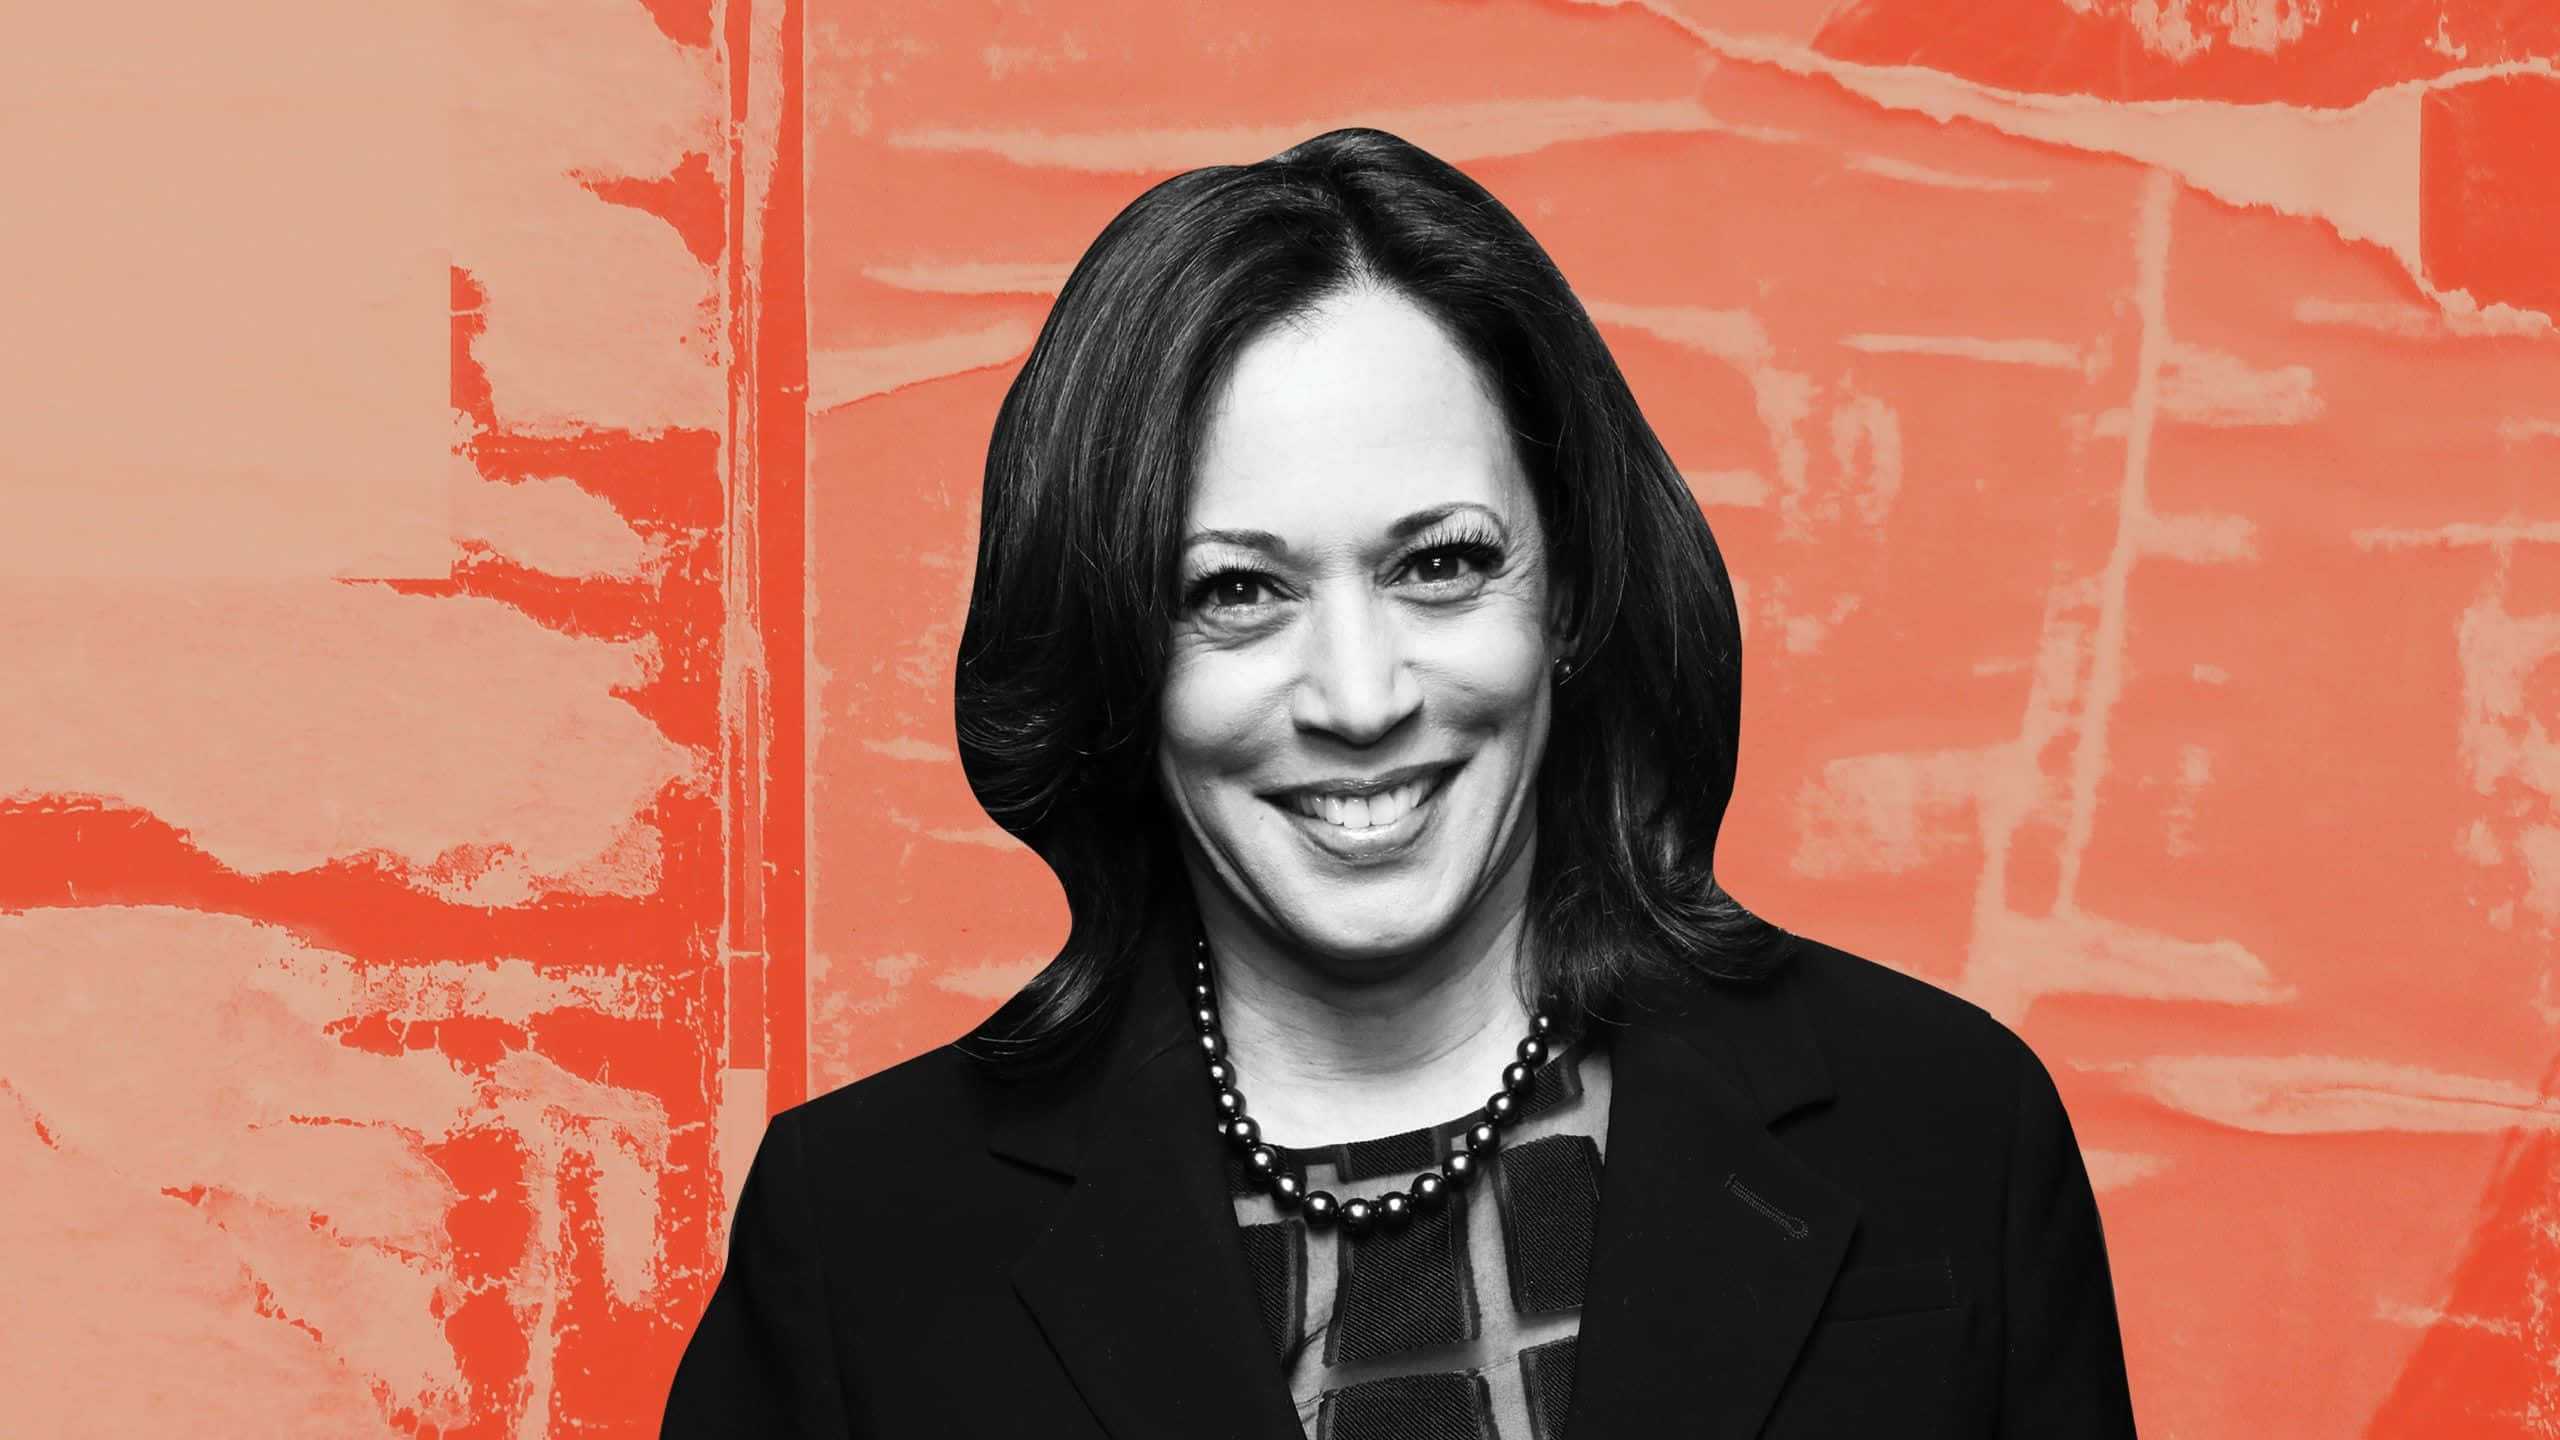 Kamala Harris Smiling in a Confident Pose